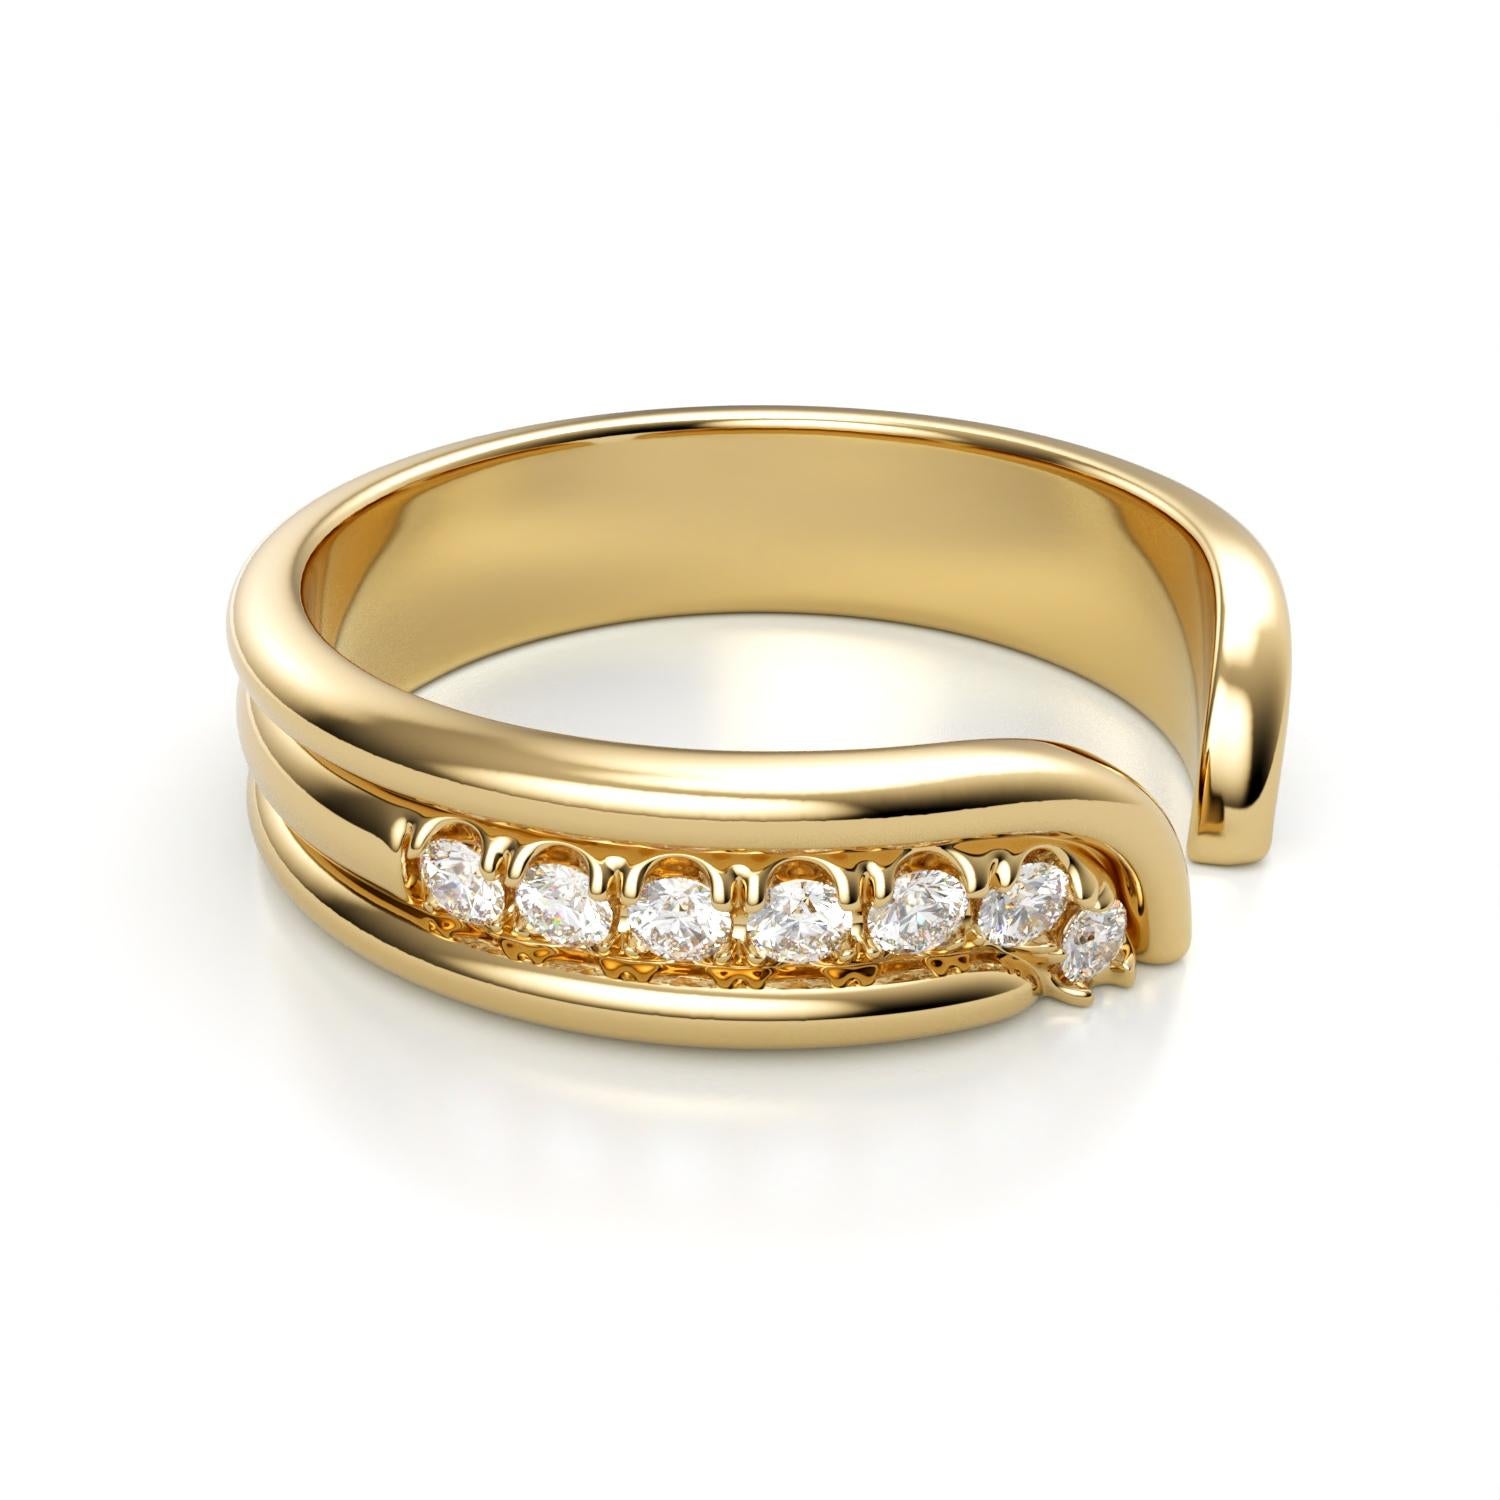 Contemporary Casey Perez open band ring with ribbed detail and diamond pave For Sale